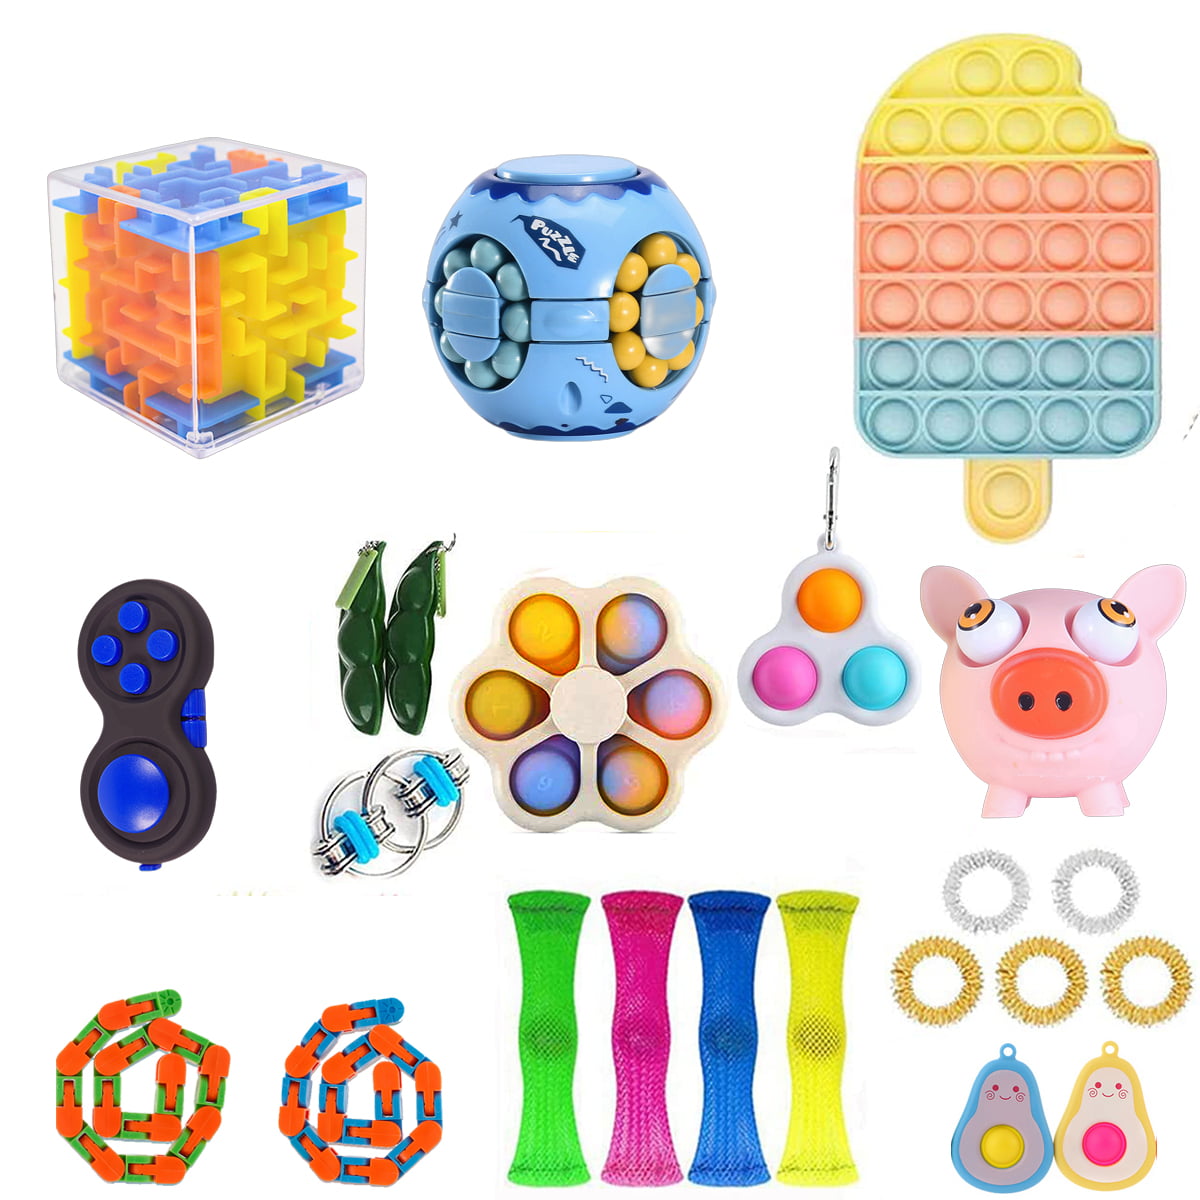 HOT Sensory Fidgets Toys Autism Special Needs Relieve Stress and Increase Focus